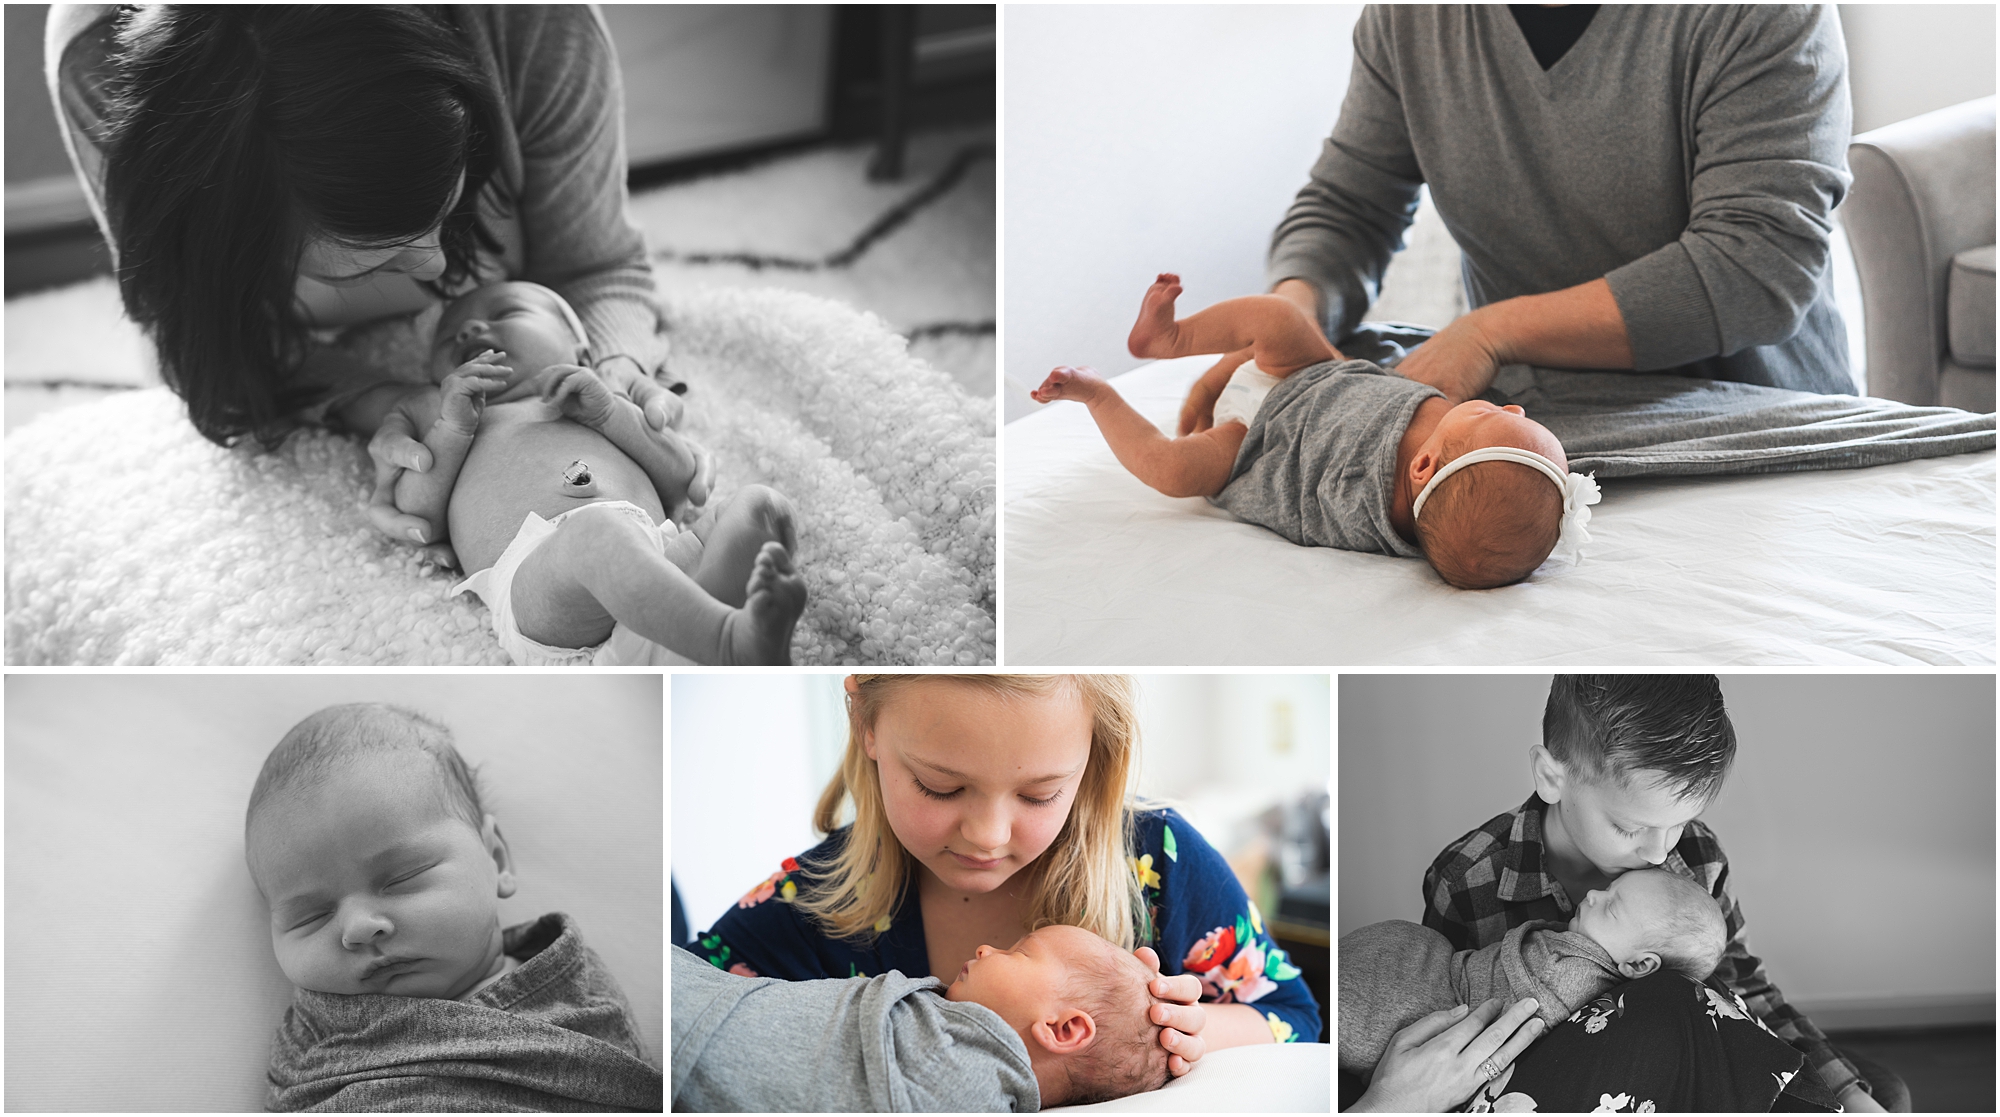 5 photo collage of family interacting with newborn